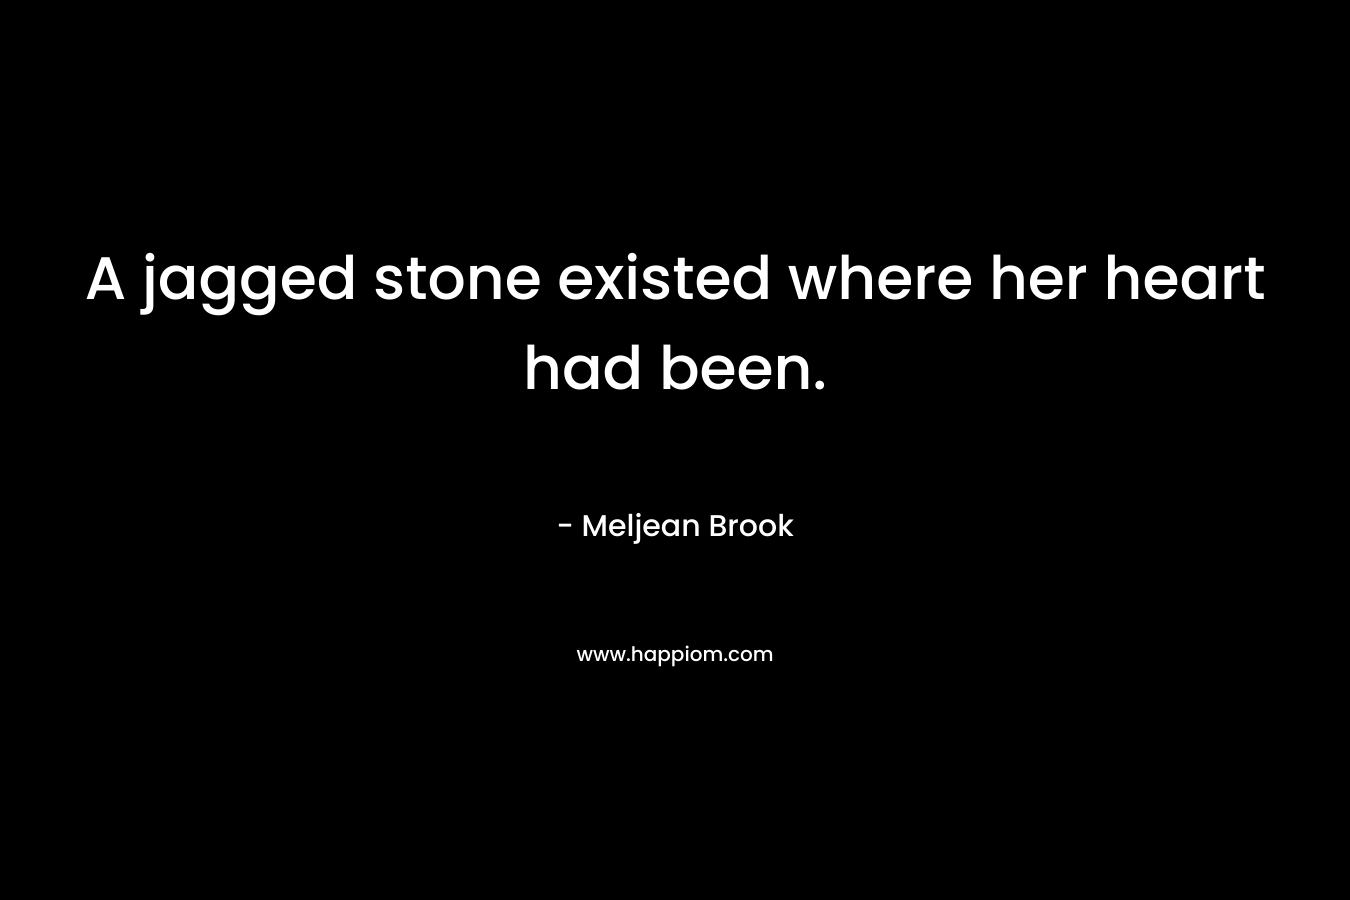 A jagged stone existed where her heart had been. – Meljean Brook